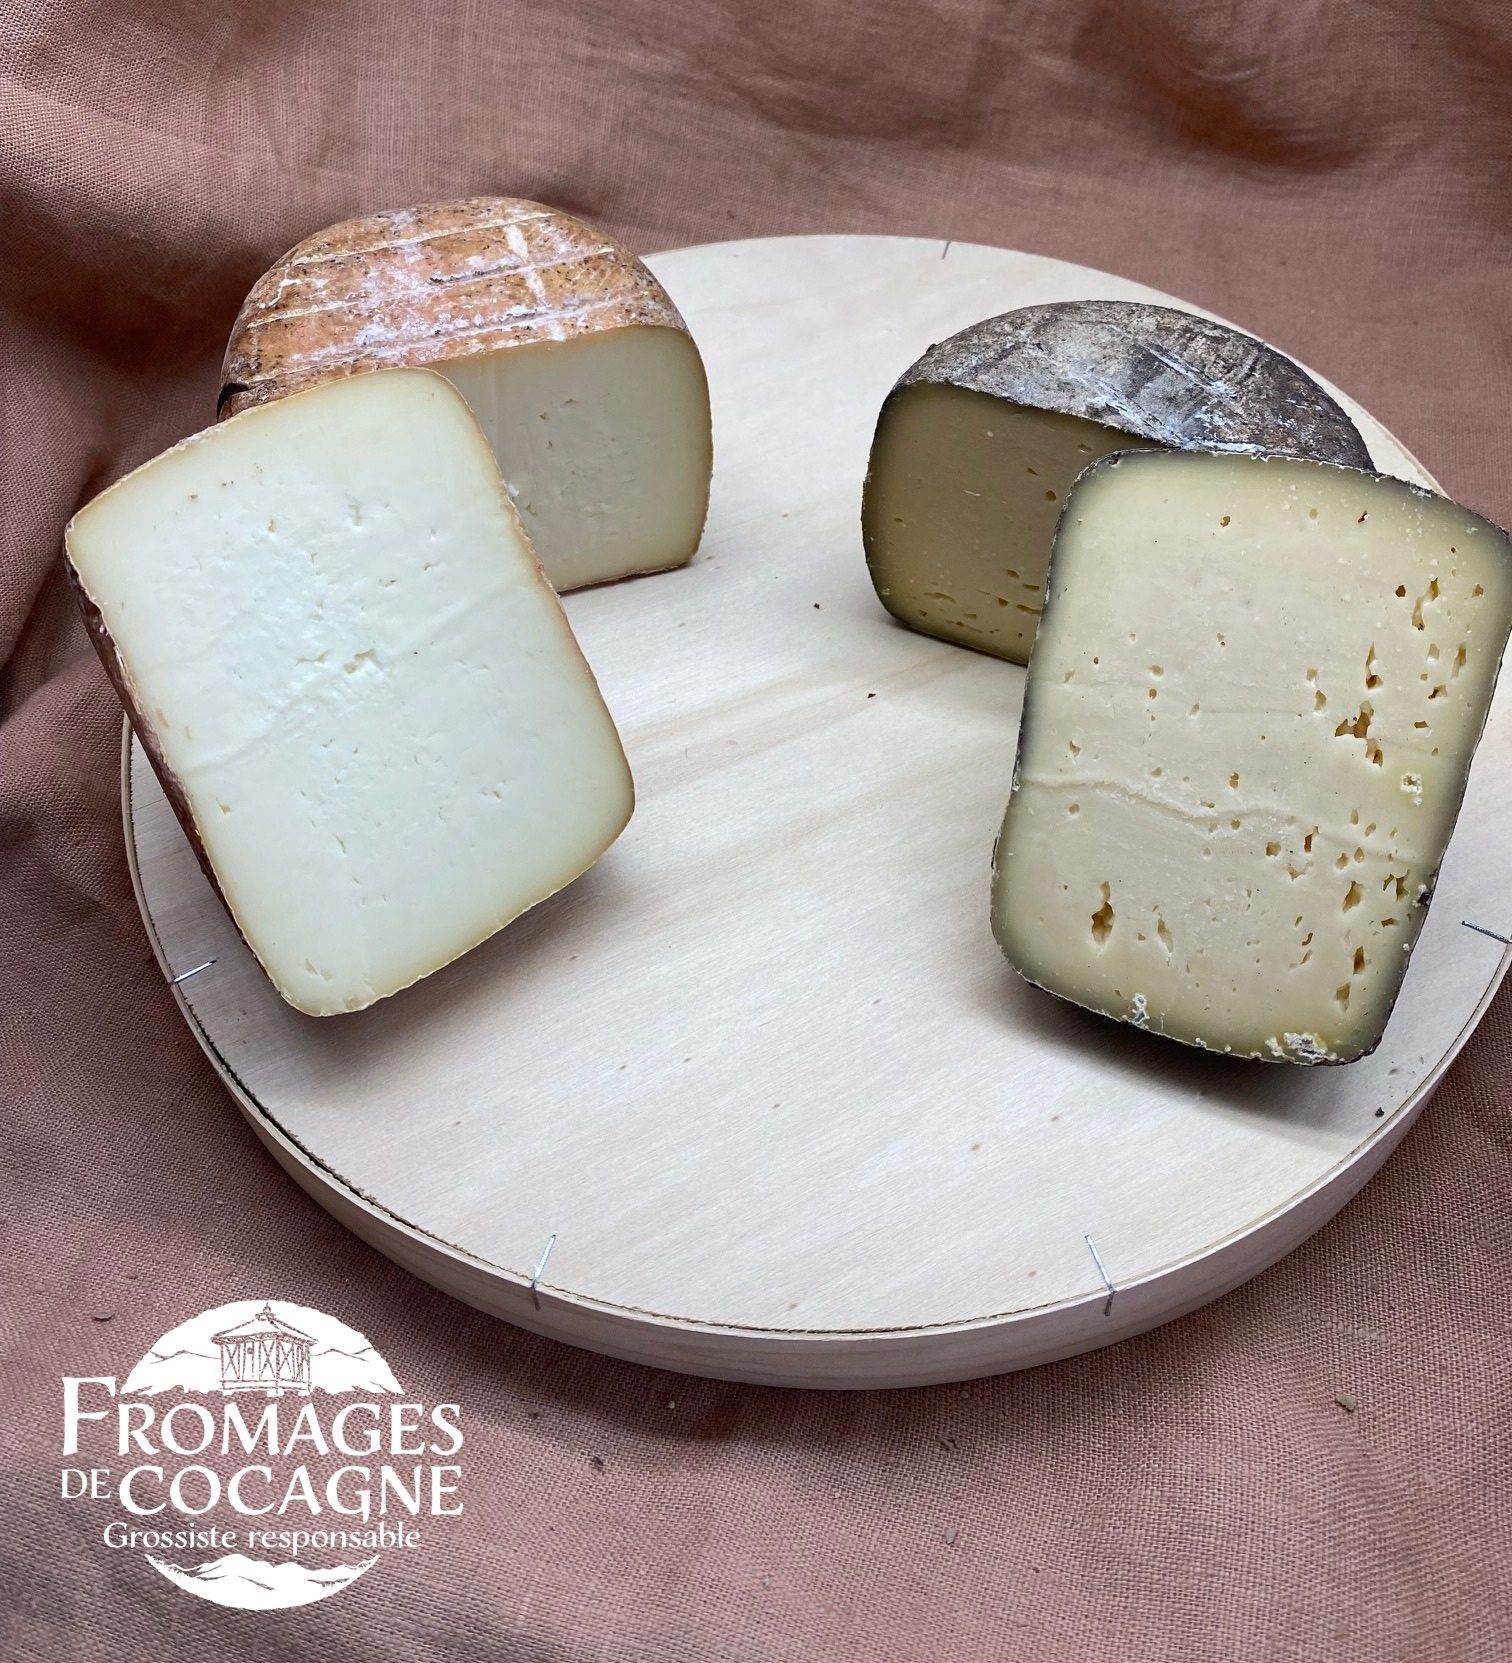 fromages de cocagne photo cover newsletter